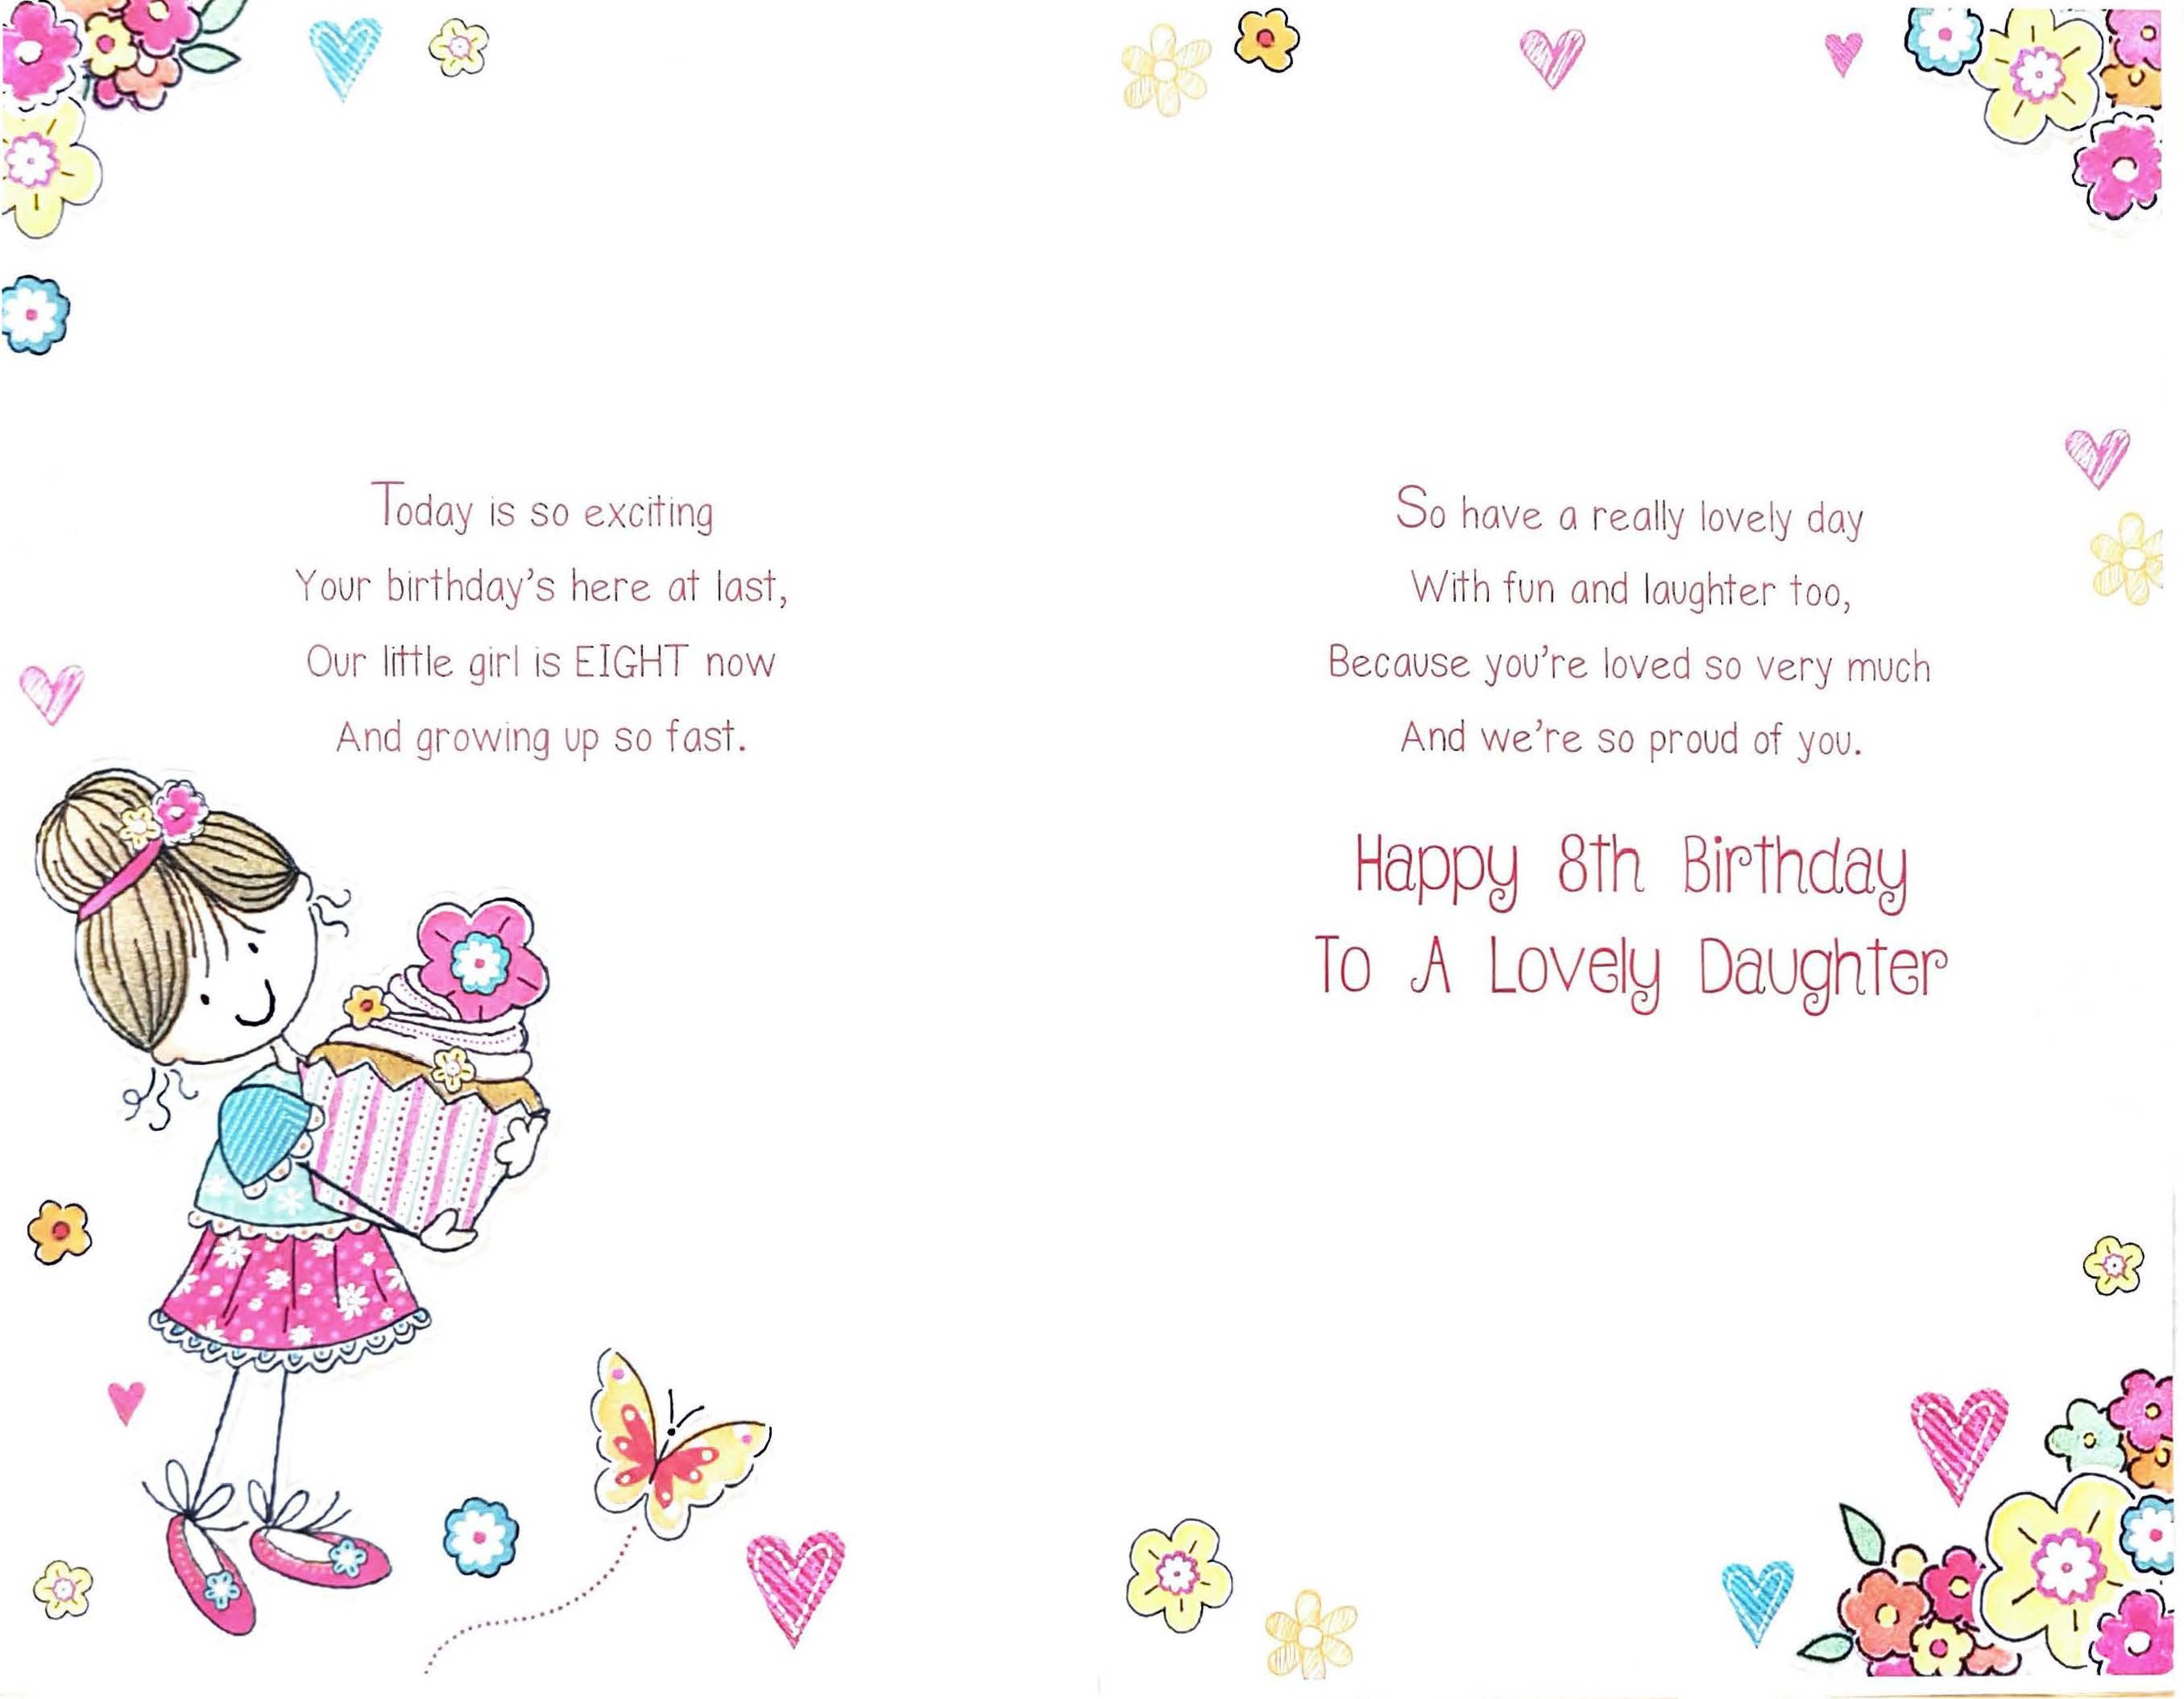 Daughter 8th Birthday Card - Cake and Flower